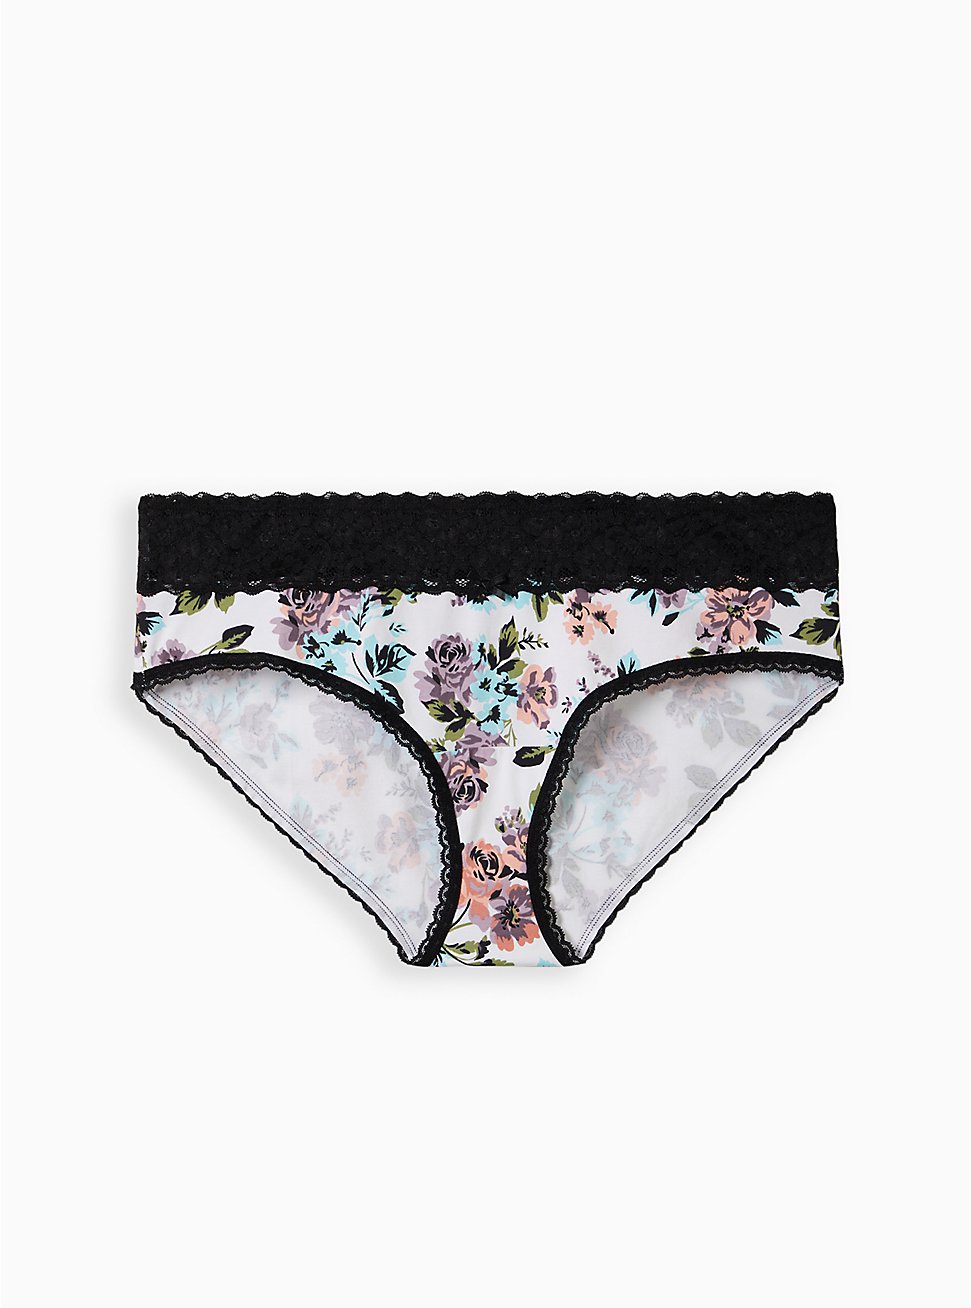 Plus Size Wide Lace Hipster Panty - Floral White, PINKY SWEAR FLORAL: WHITE, hi-res